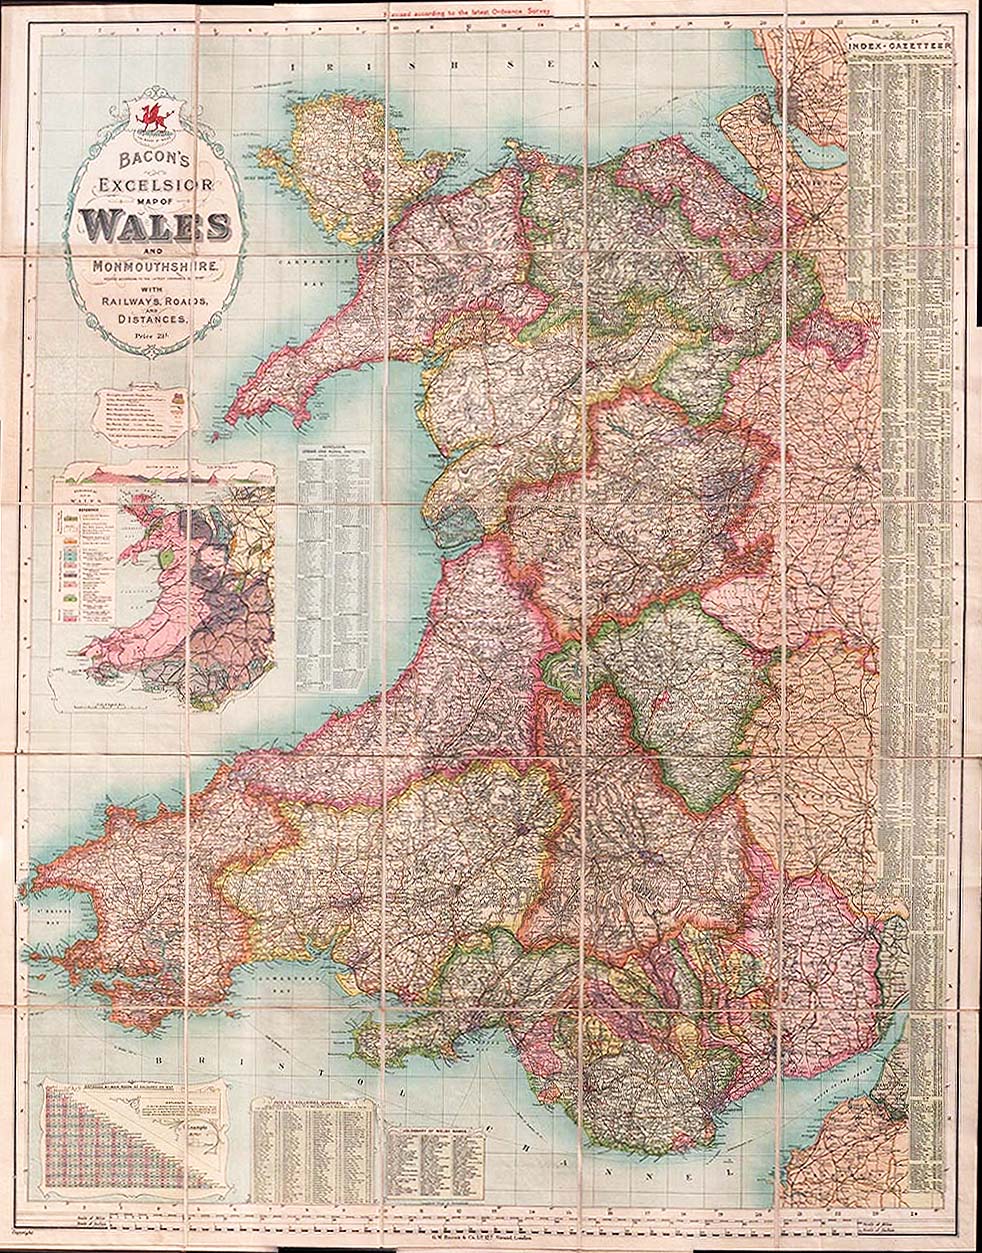 Bacon's Excelsior Map of Wales